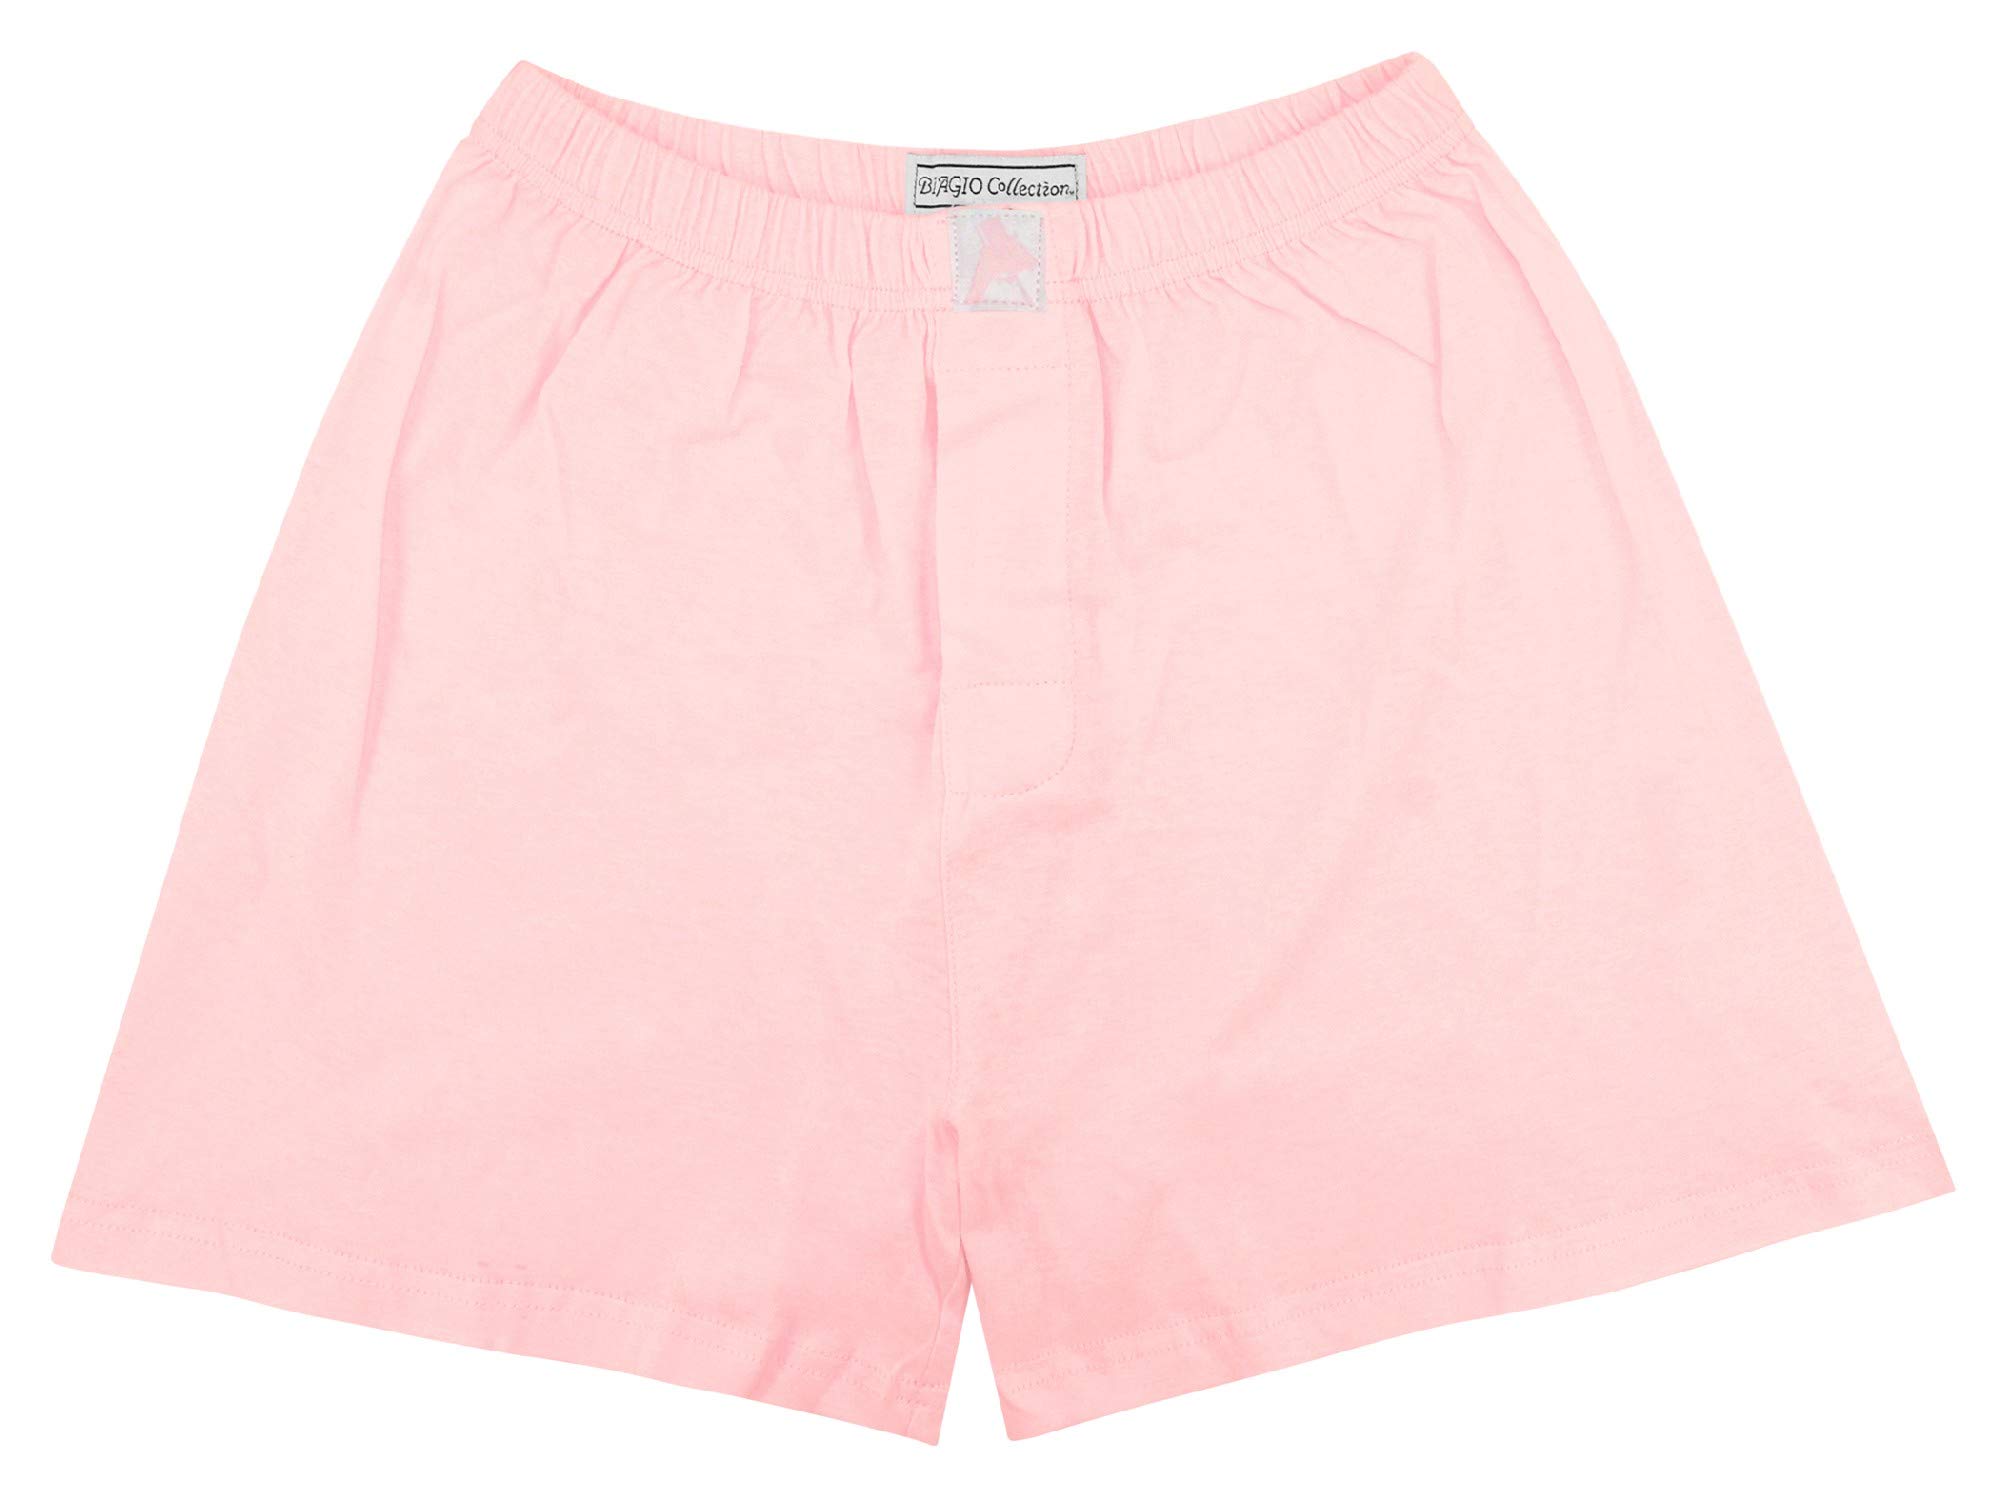 Where To Buy Plain Pink Boxer Shorts